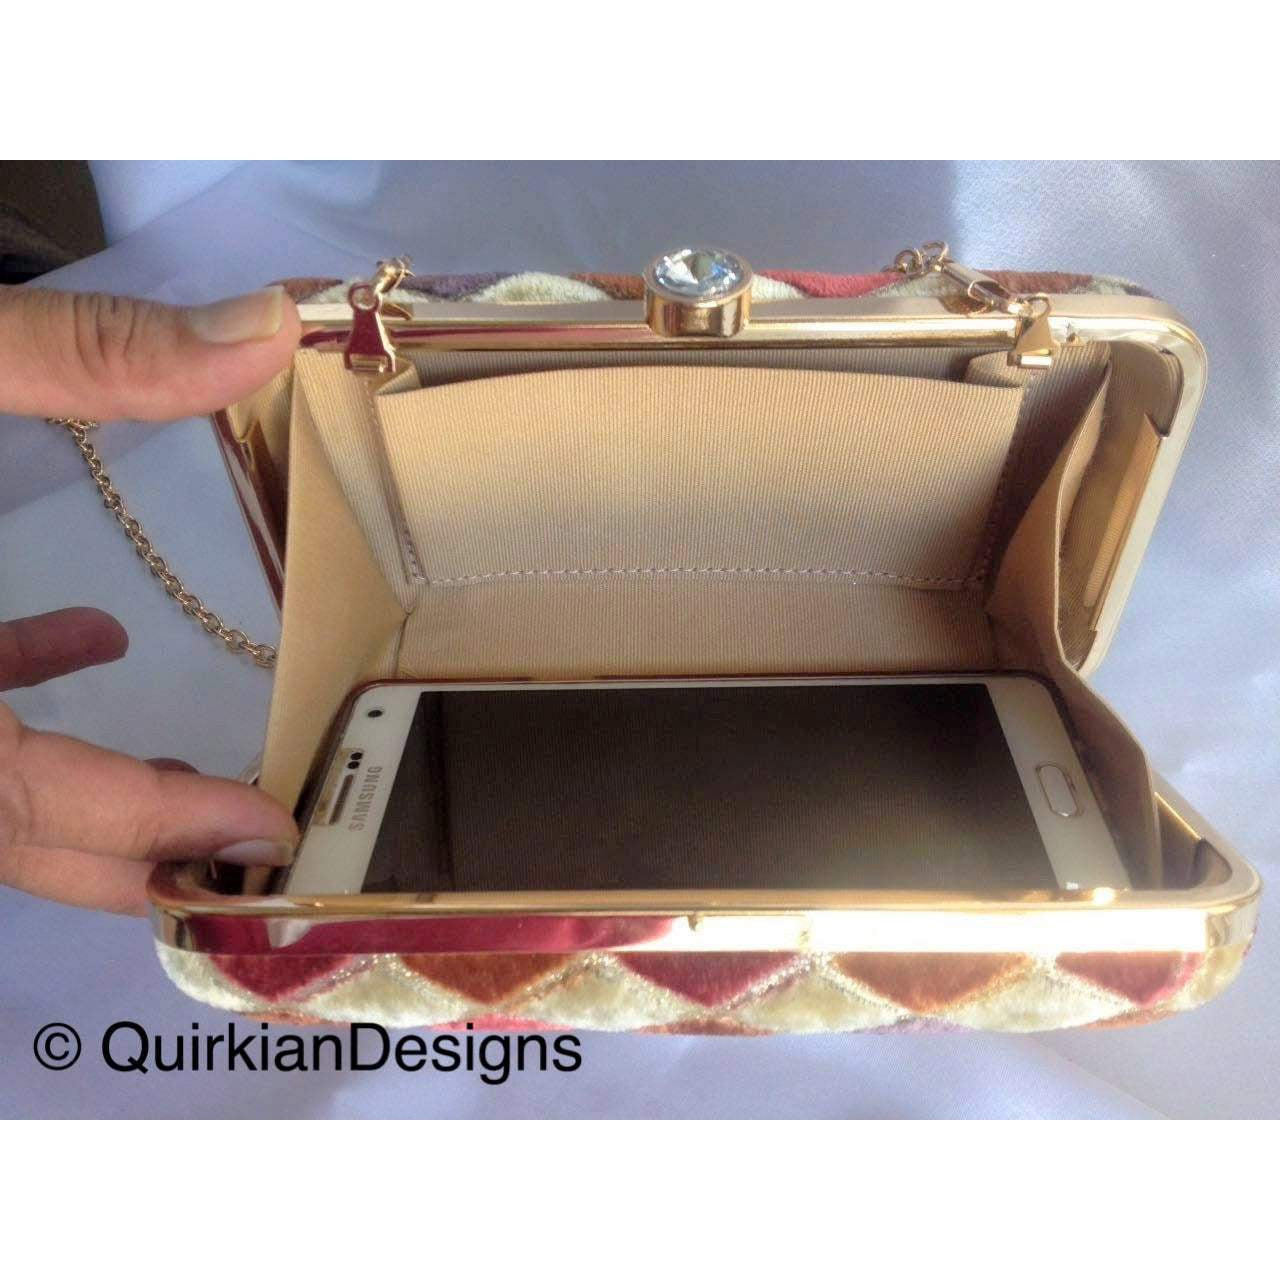 Gold Hard Body Box Clutch Bag With Diamante Clasp, Brown, Green And Grey Velvet Fabric Covered Purse